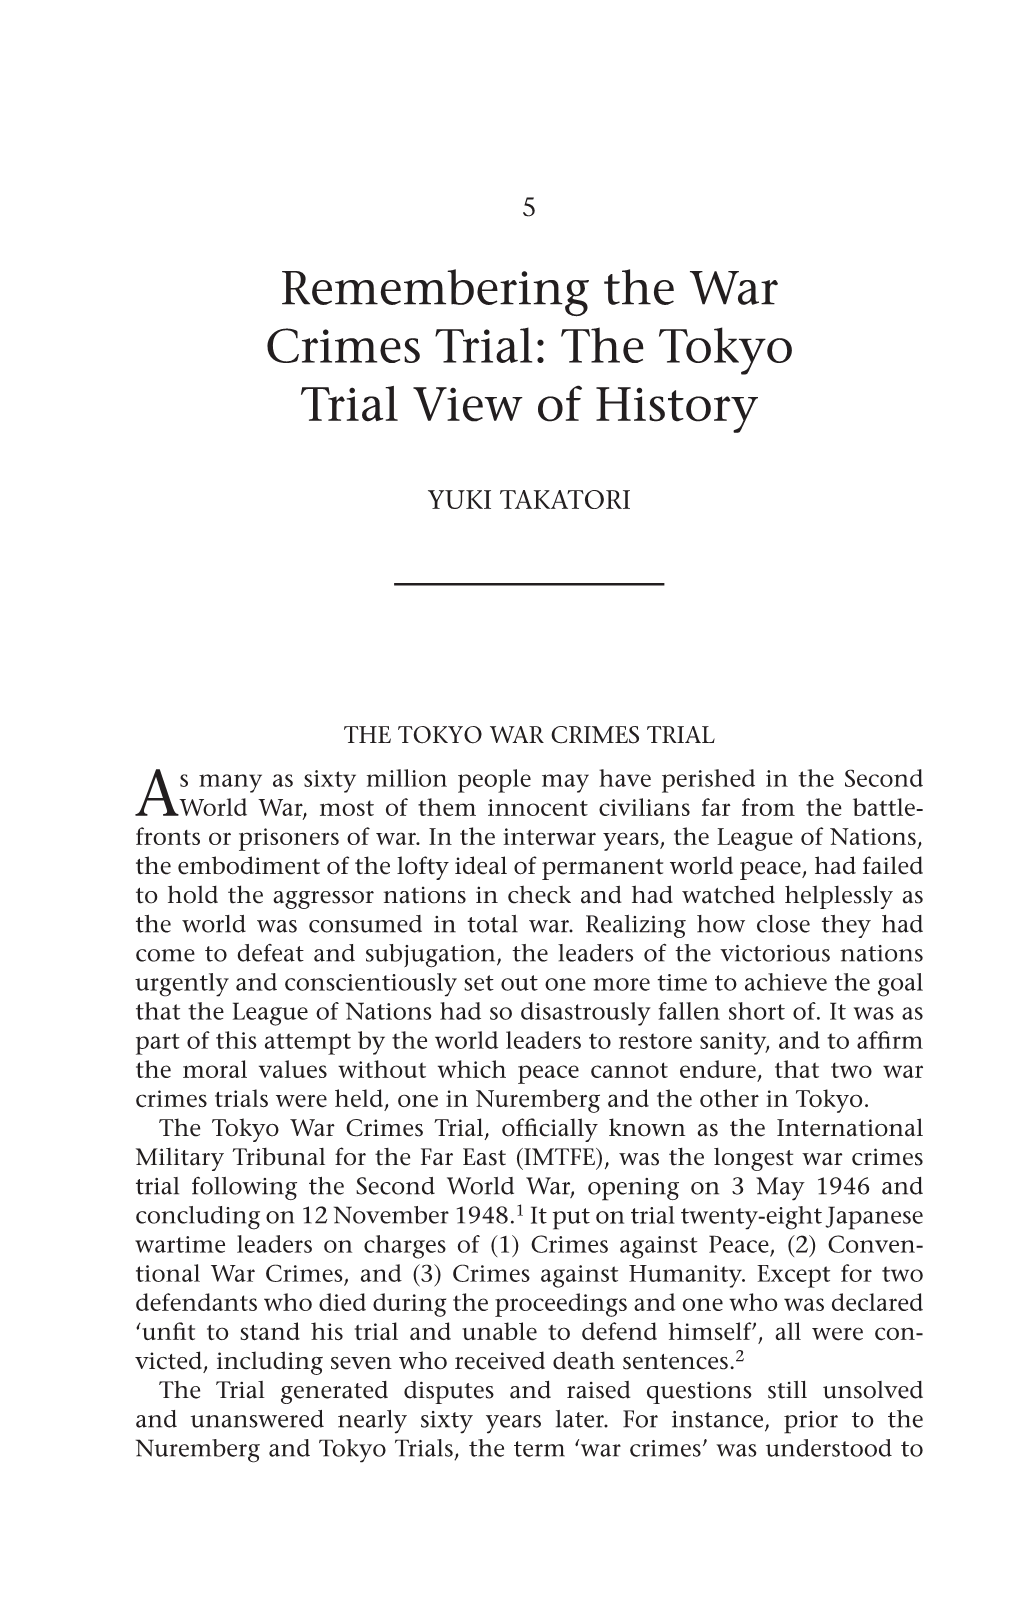 Remembering the War Crimes Trial: the Tokyo Trial View of History